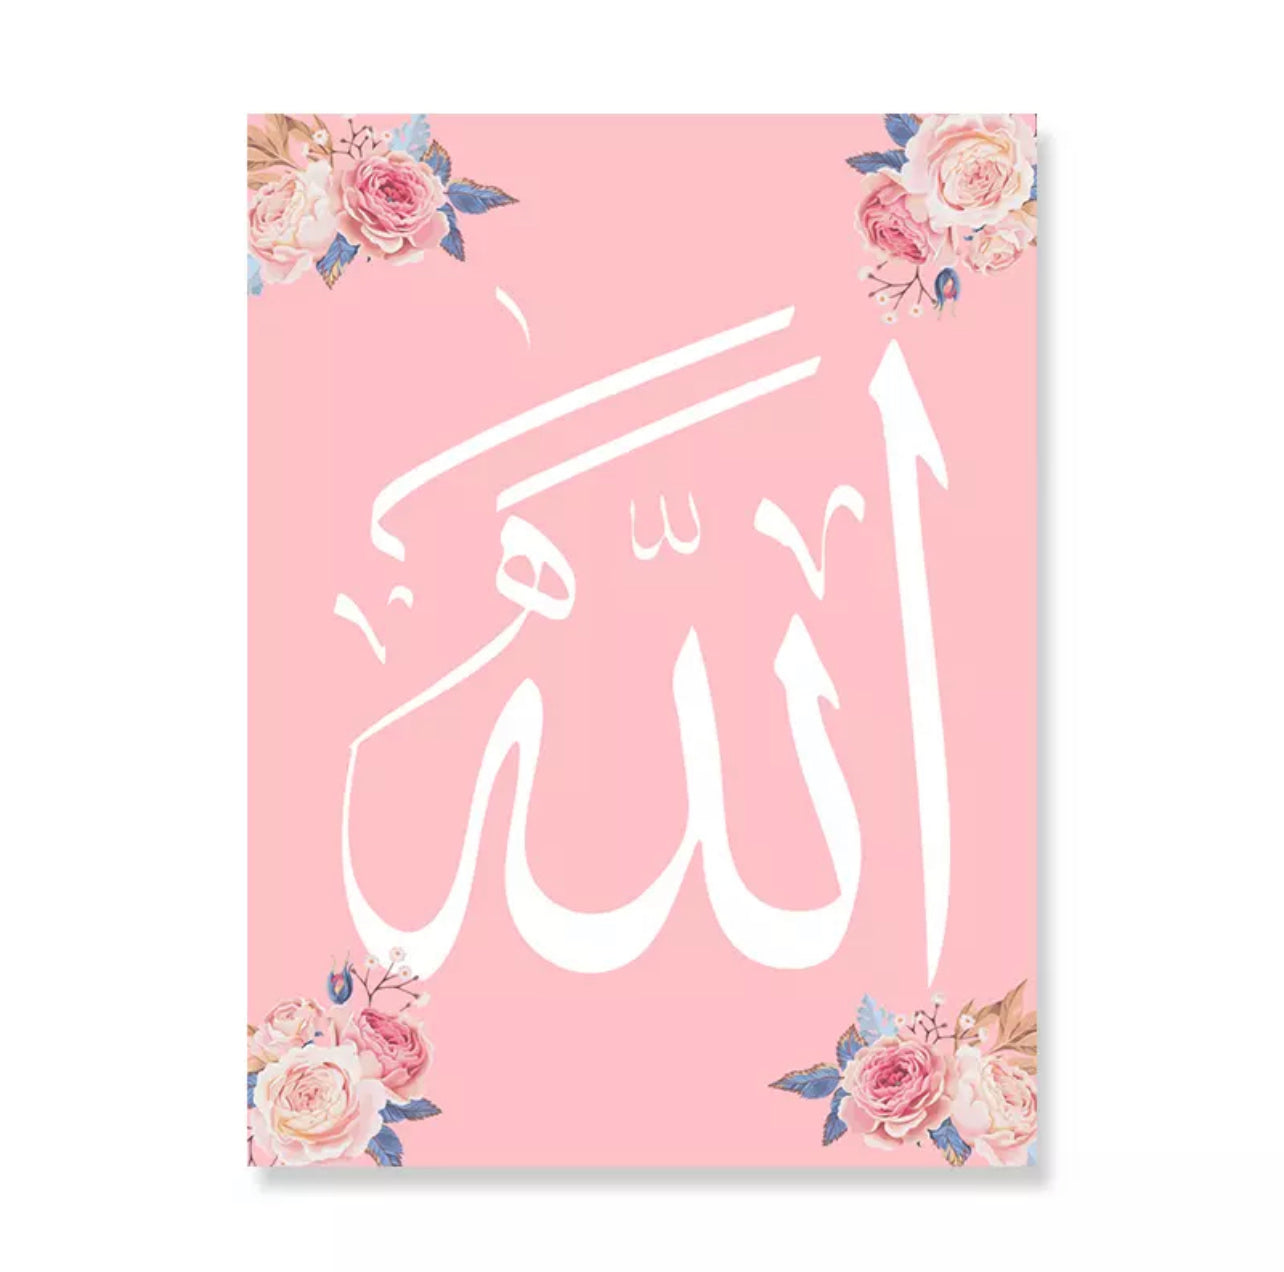 Pink With Cornered Floral Design And White Islamic Calligraphy